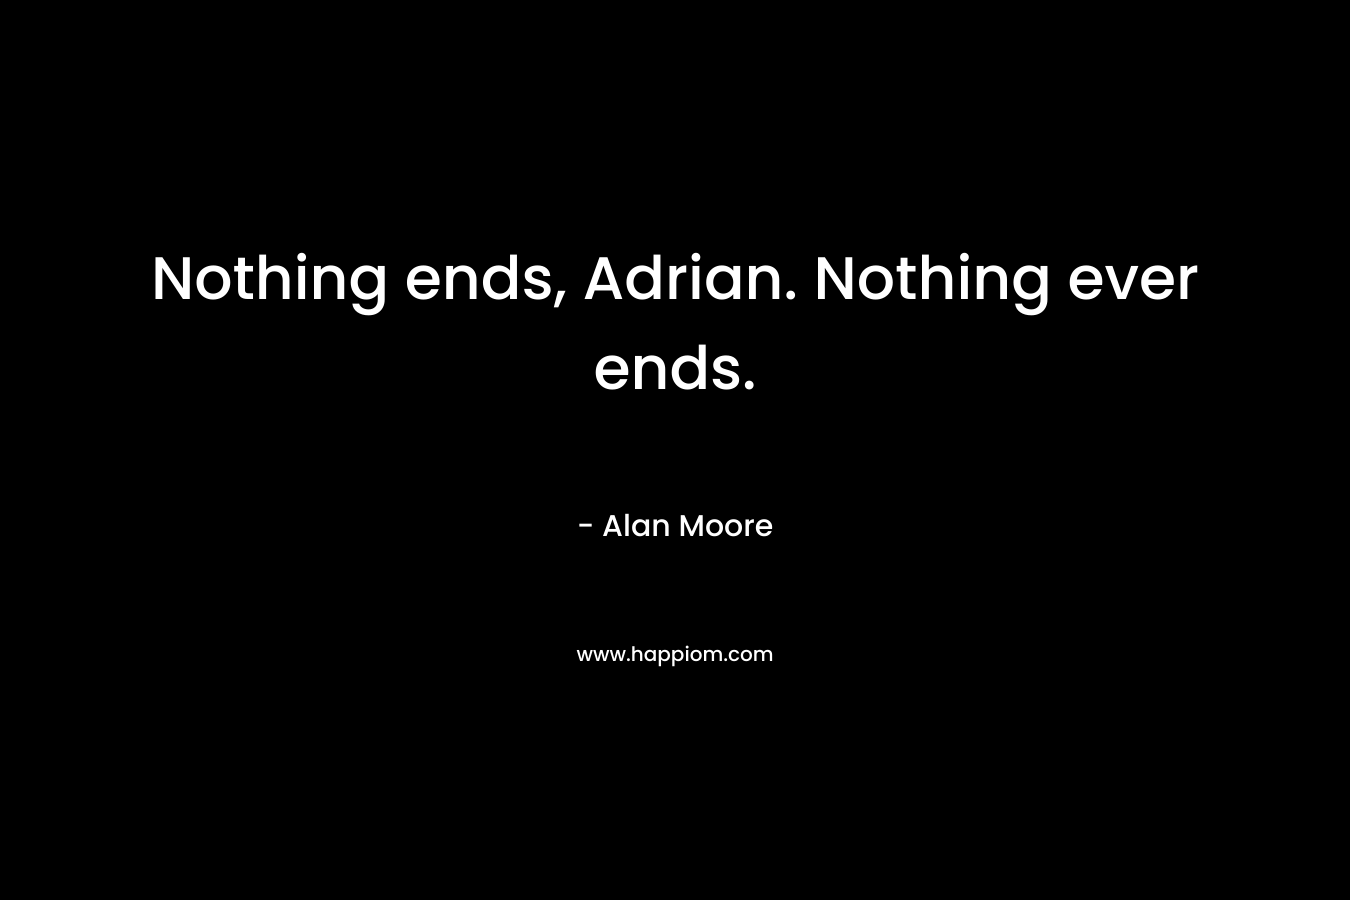 Nothing ends, Adrian. Nothing ever ends. – Alan Moore